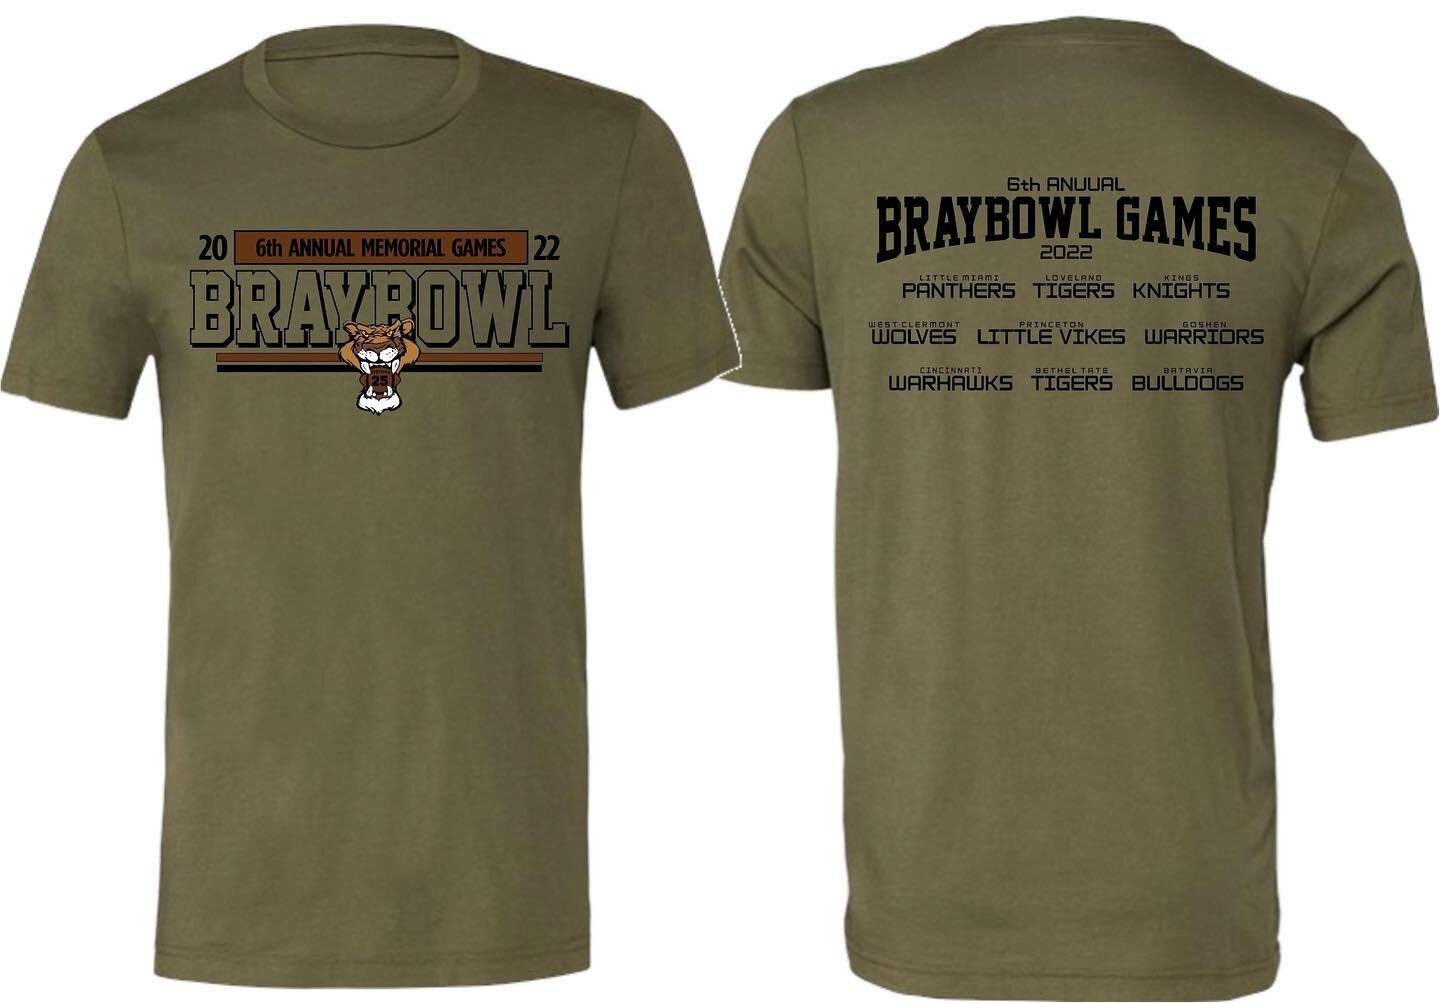 Join us at LMHS from 10am-4pm tomorrow, July 30th and Sunday July 31st from 11am-5pm for the 6th annual Bray Bowl. We will have a pop up shop with t-shirts and tank tops for sale. 10% of every purchase is donated to the Brayden Thornbury scholarship 